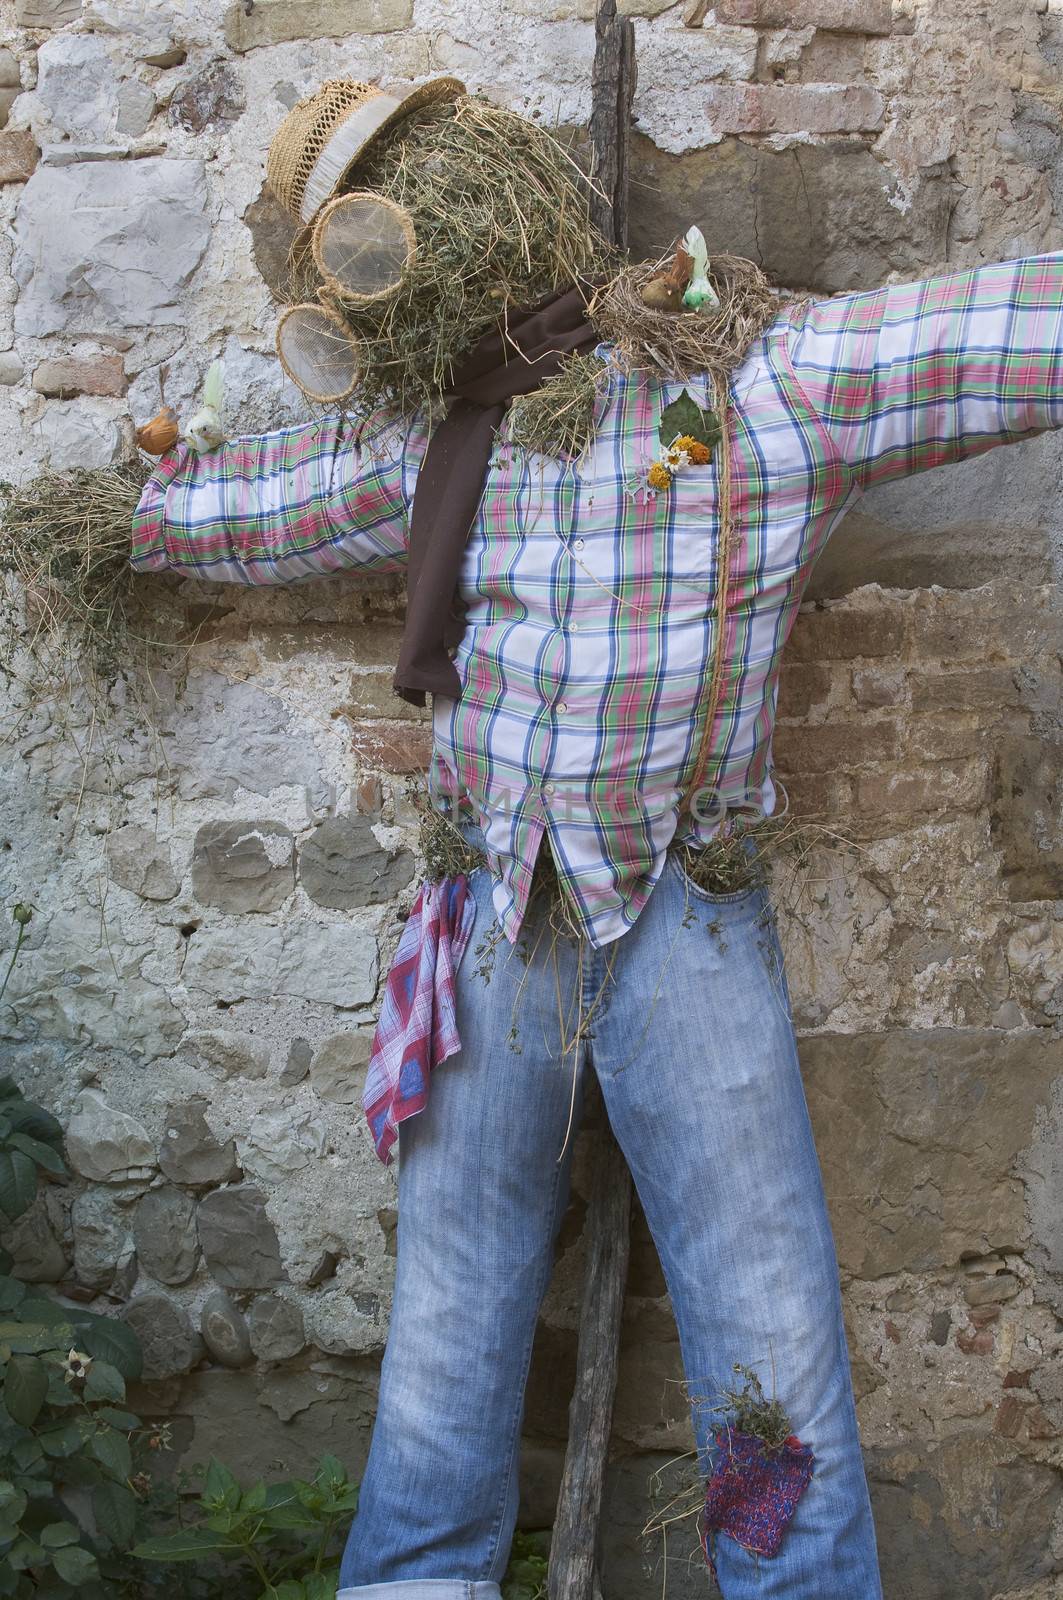 Traditional decoration of stray scarecrow wearing jeans and squared shirt against a stone wall